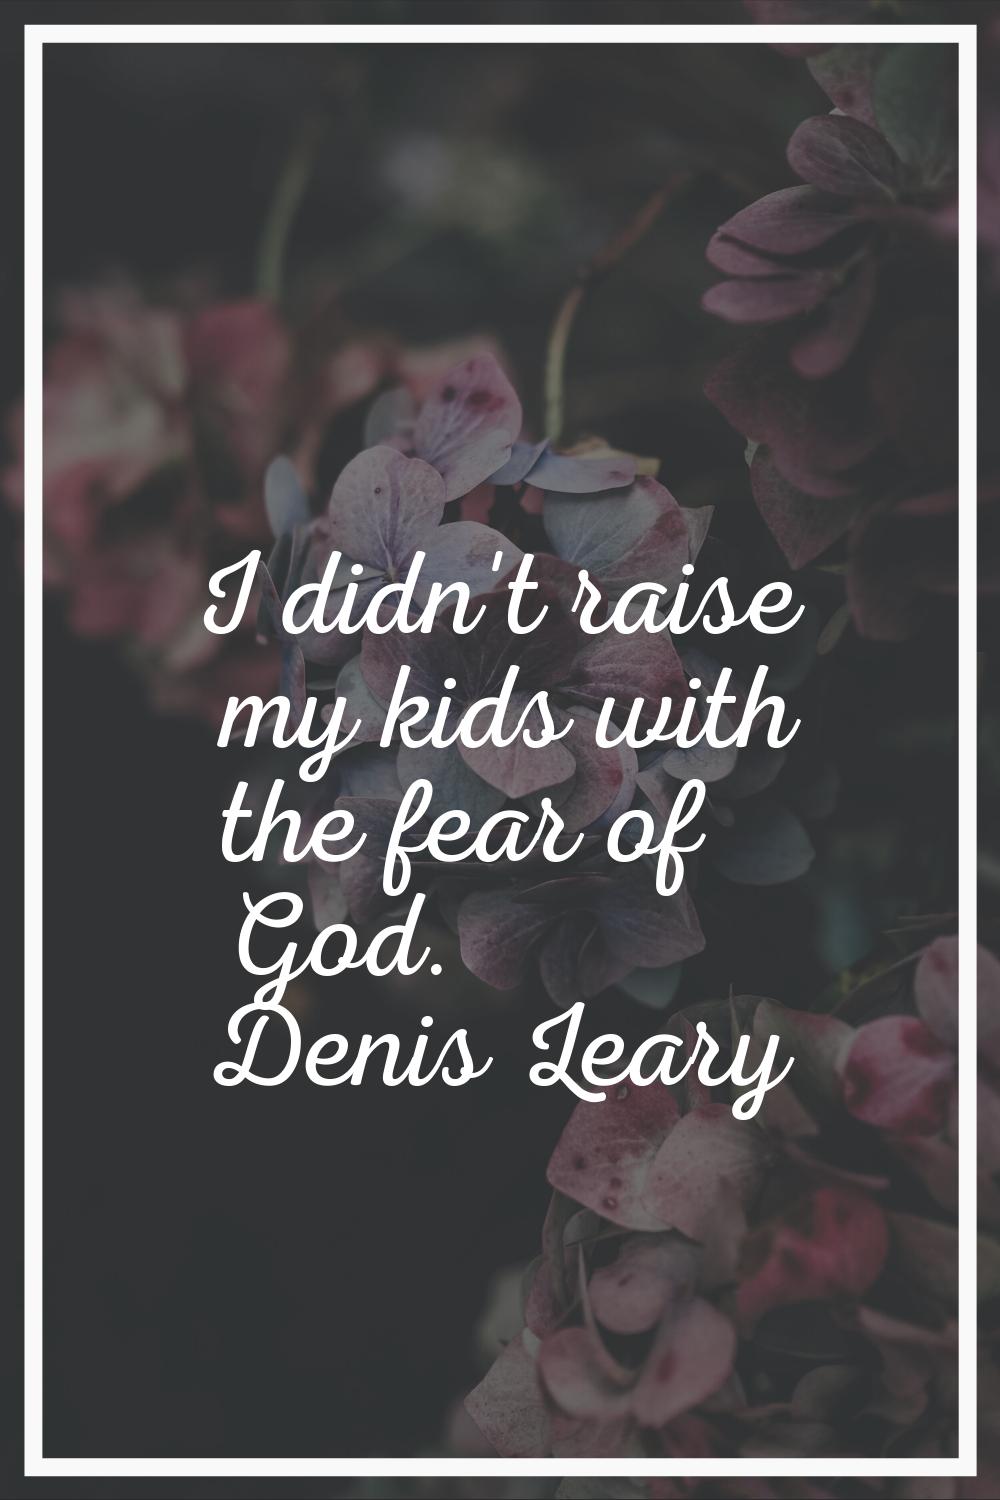 I didn't raise my kids with the fear of God.